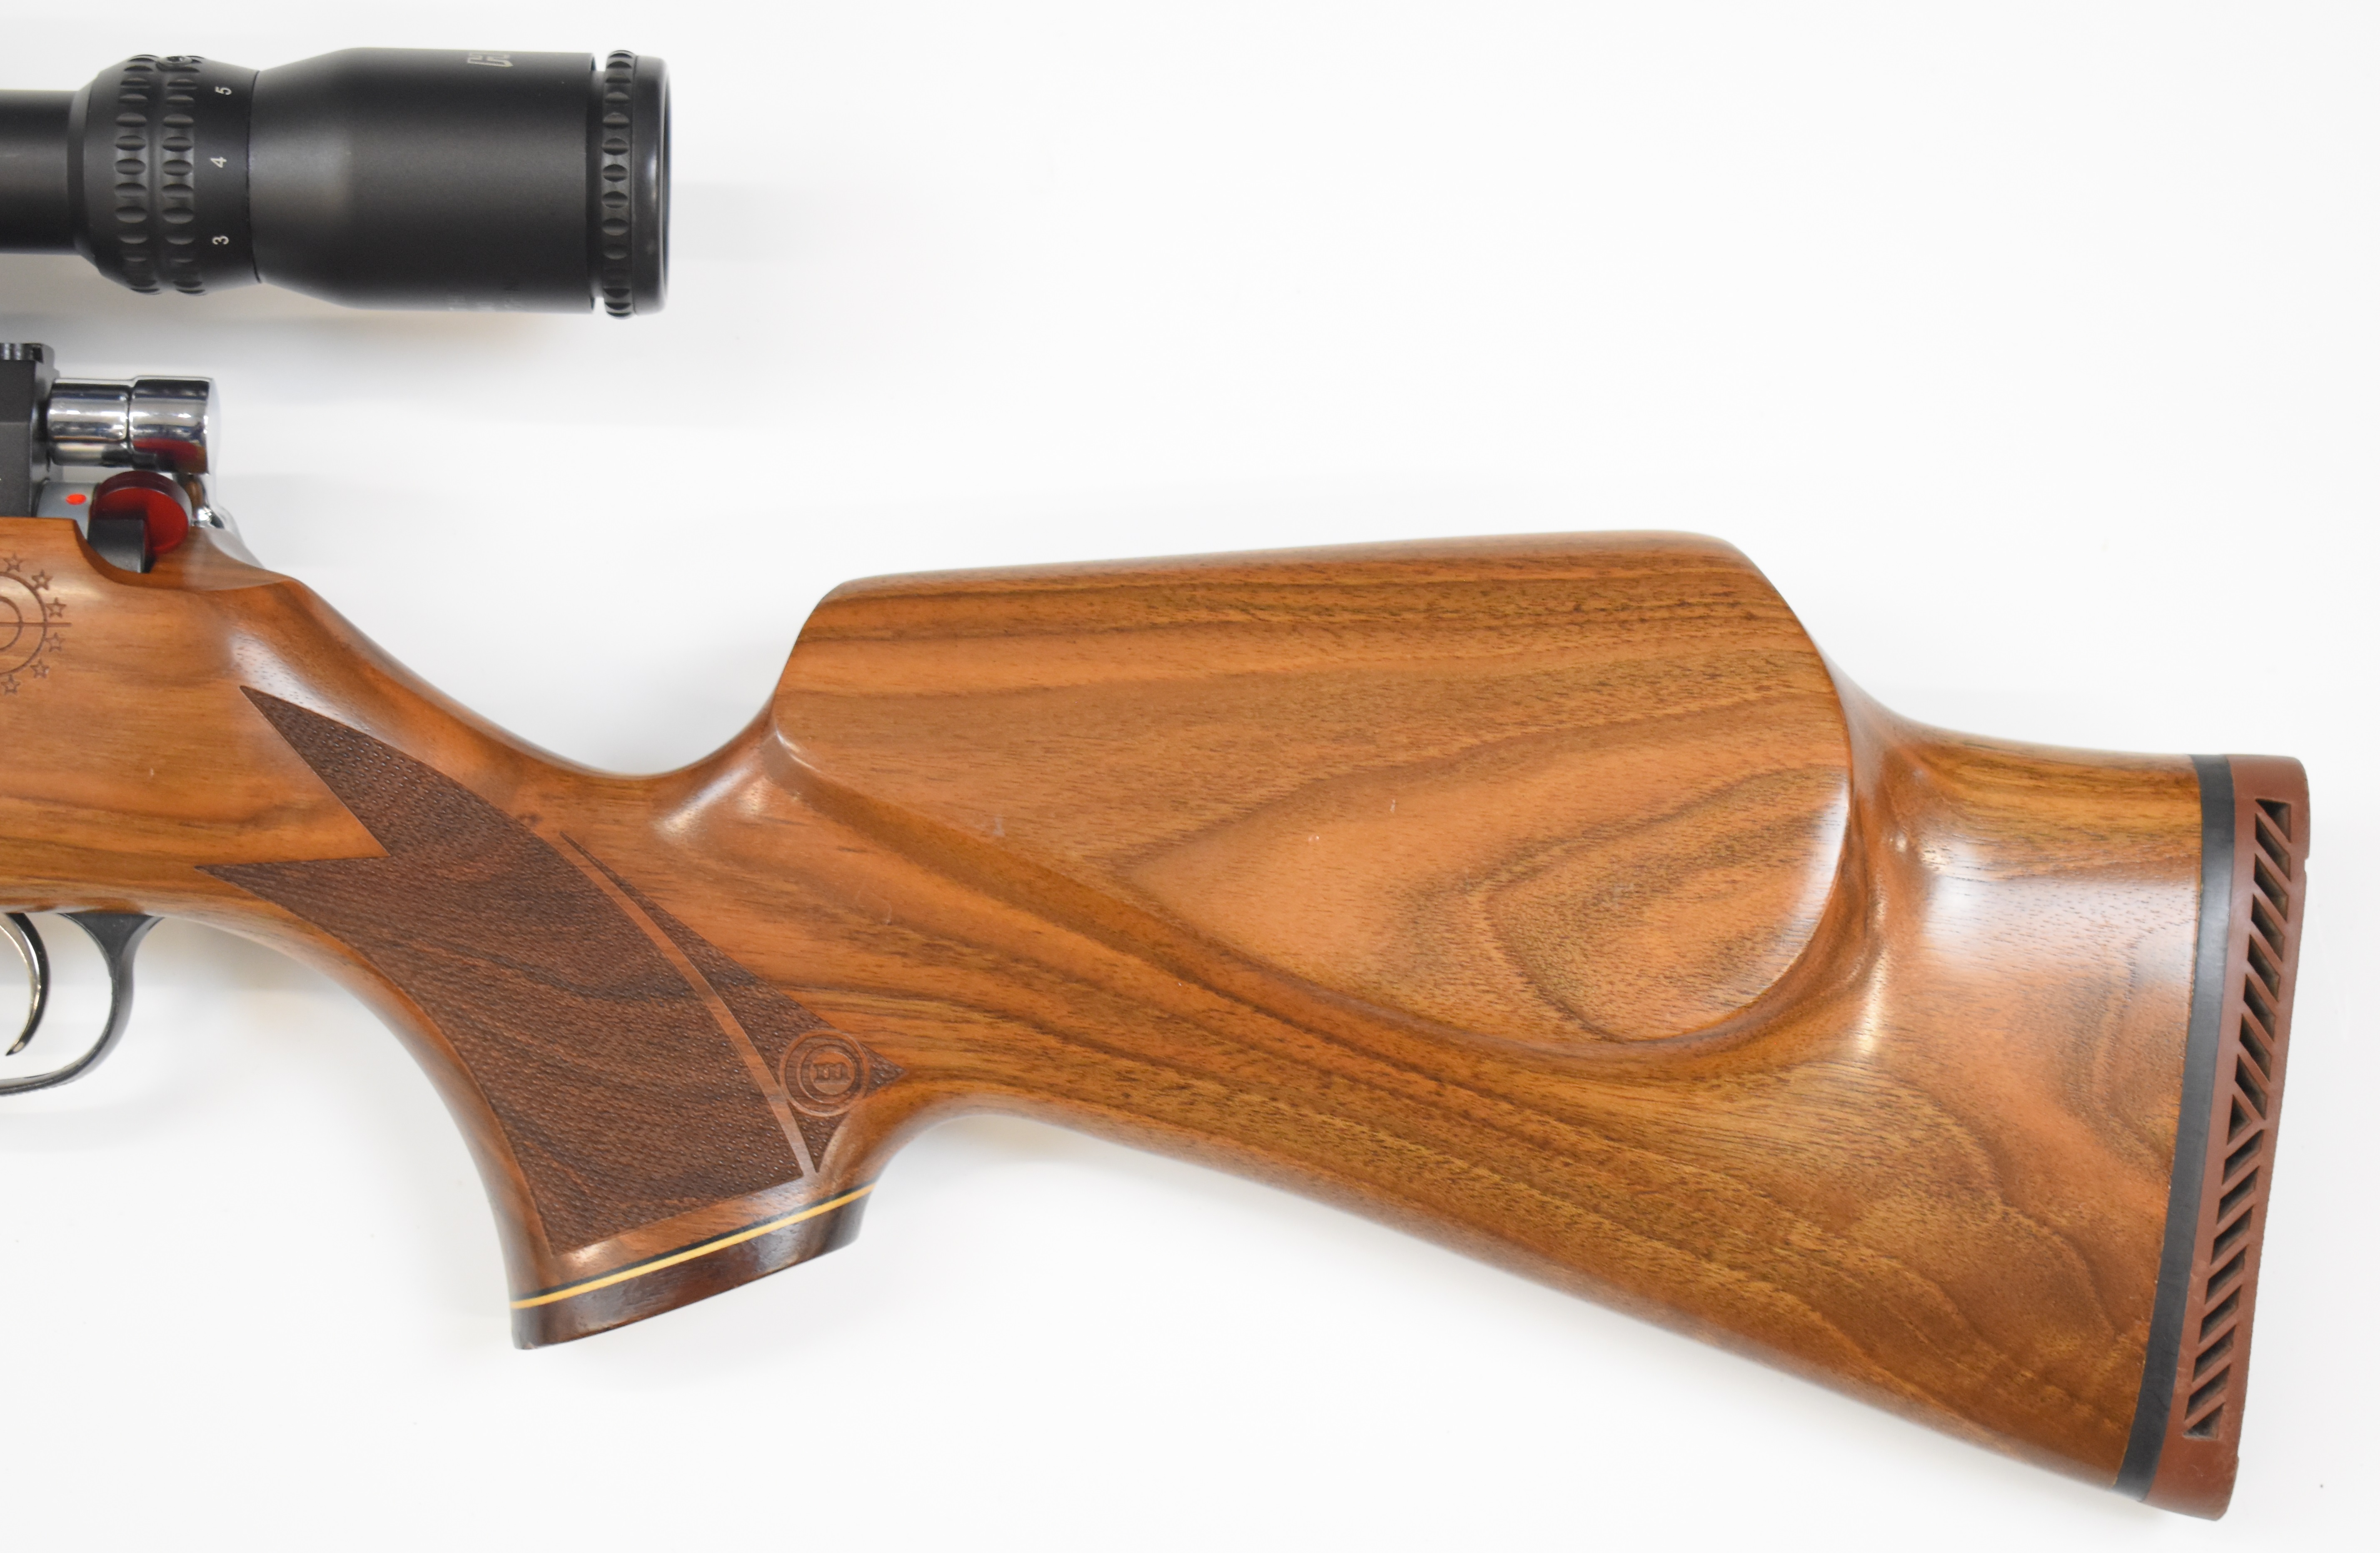 Daystate Huntsman Classic .177 PCP air rifle with monogrammed and chequered semi-pistol grip, - Image 7 of 9